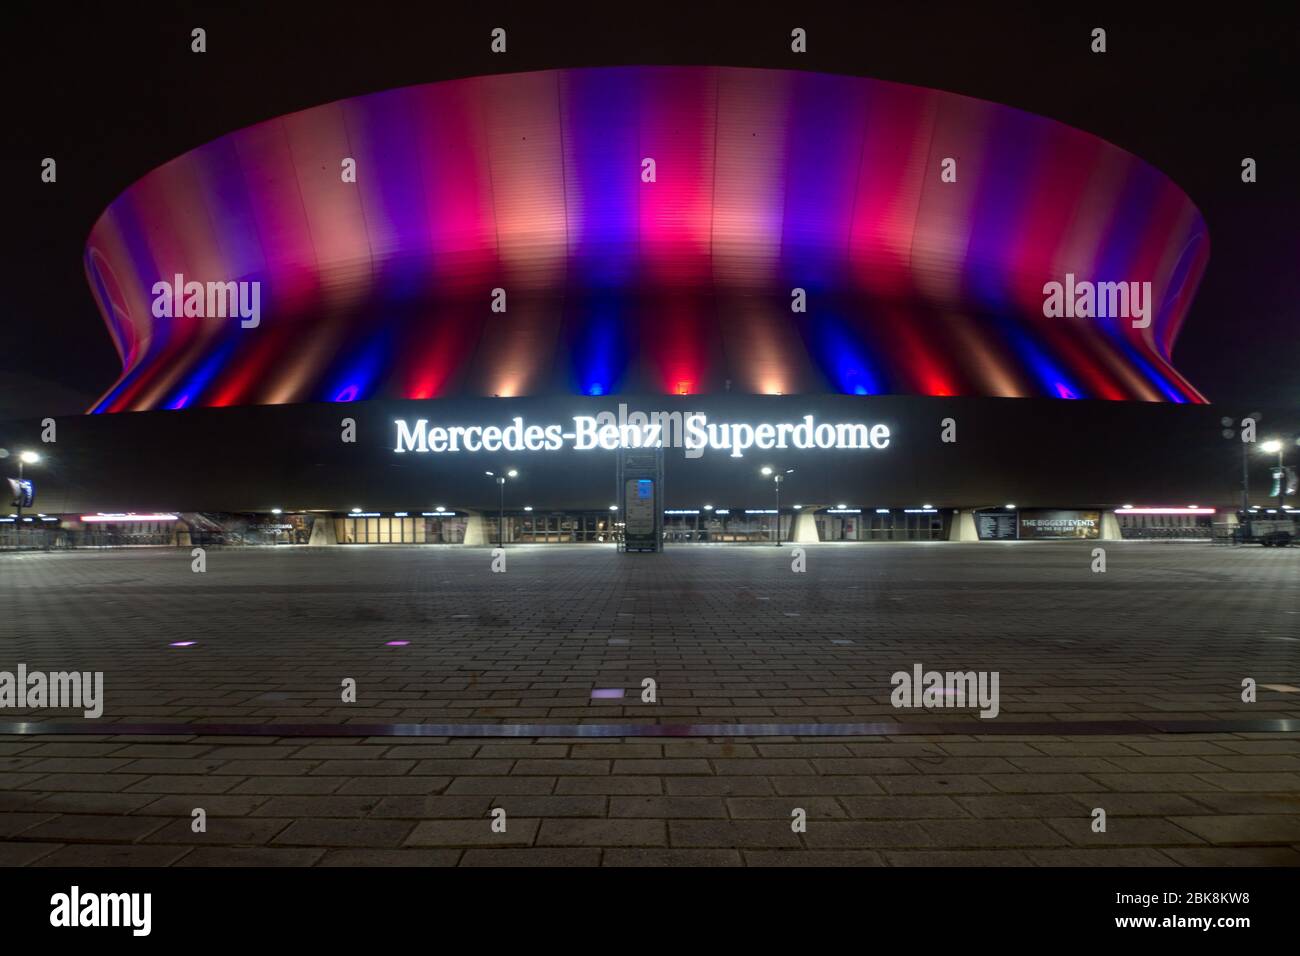 New Orleans, Louisiana, USA - 2020: Front view of the Mercedes-Benz Superdome stadium at night during a match. Stock Photo